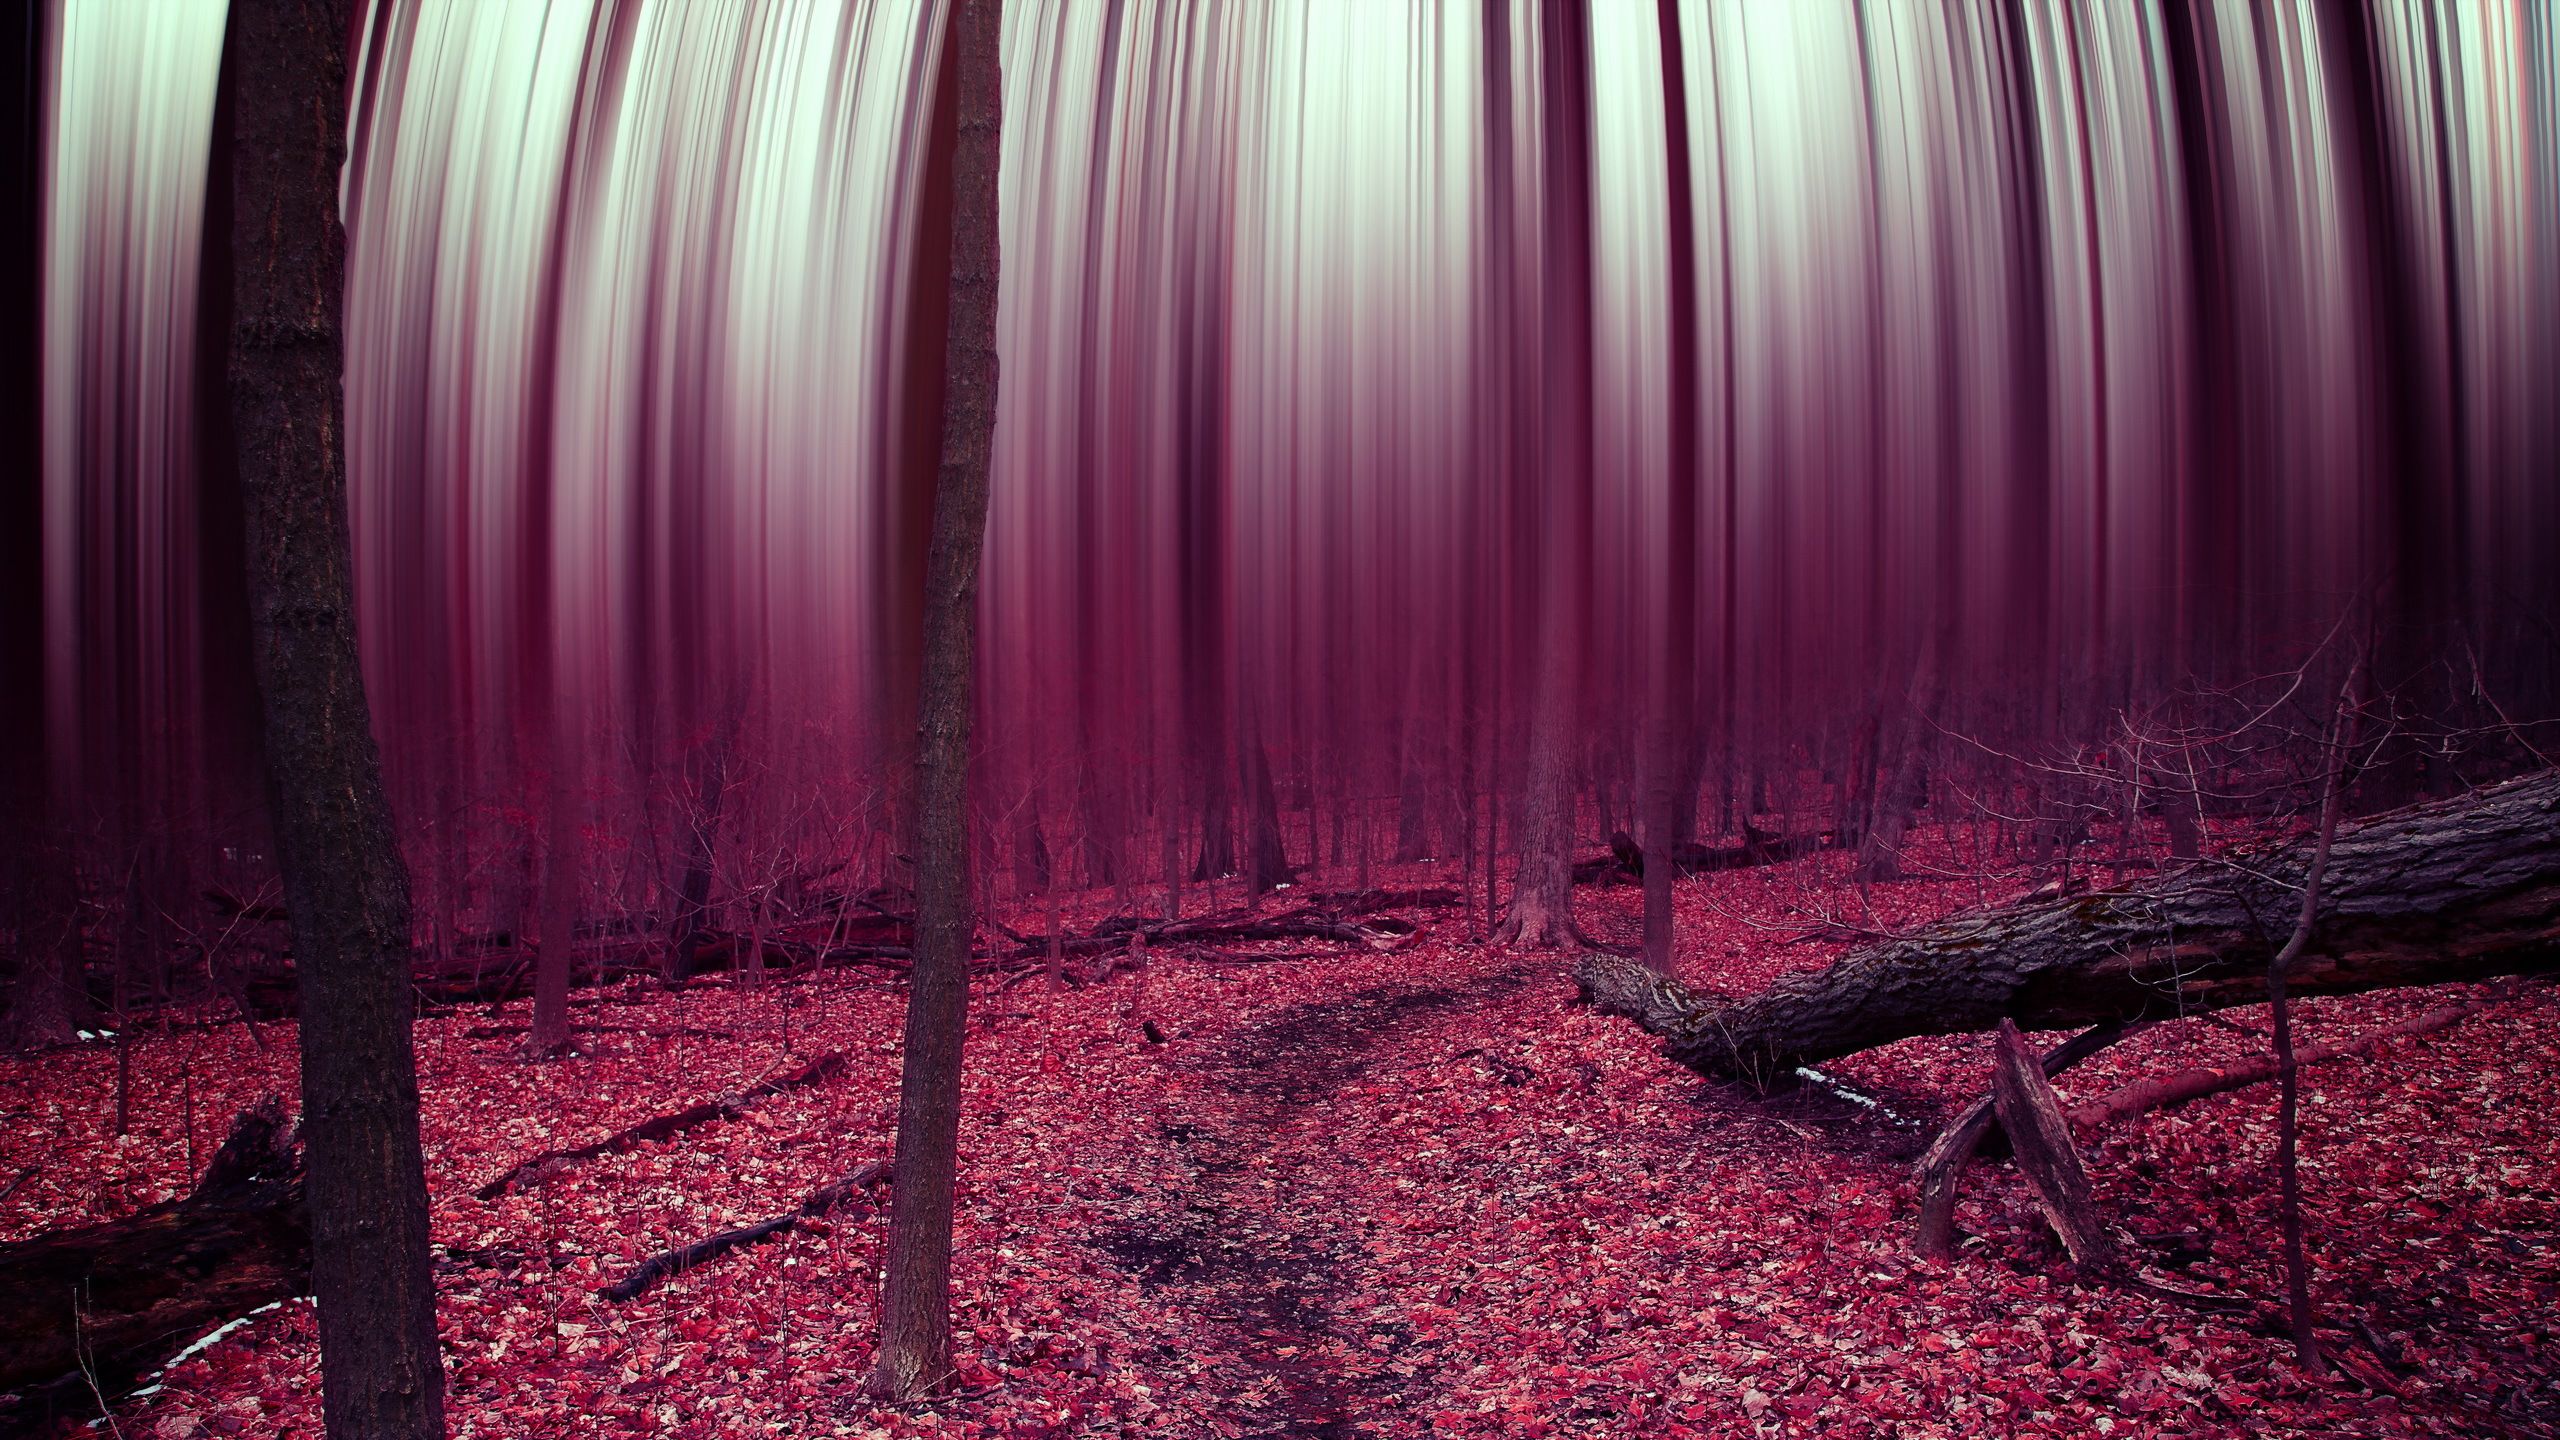 Abstract Forest Wallpapers